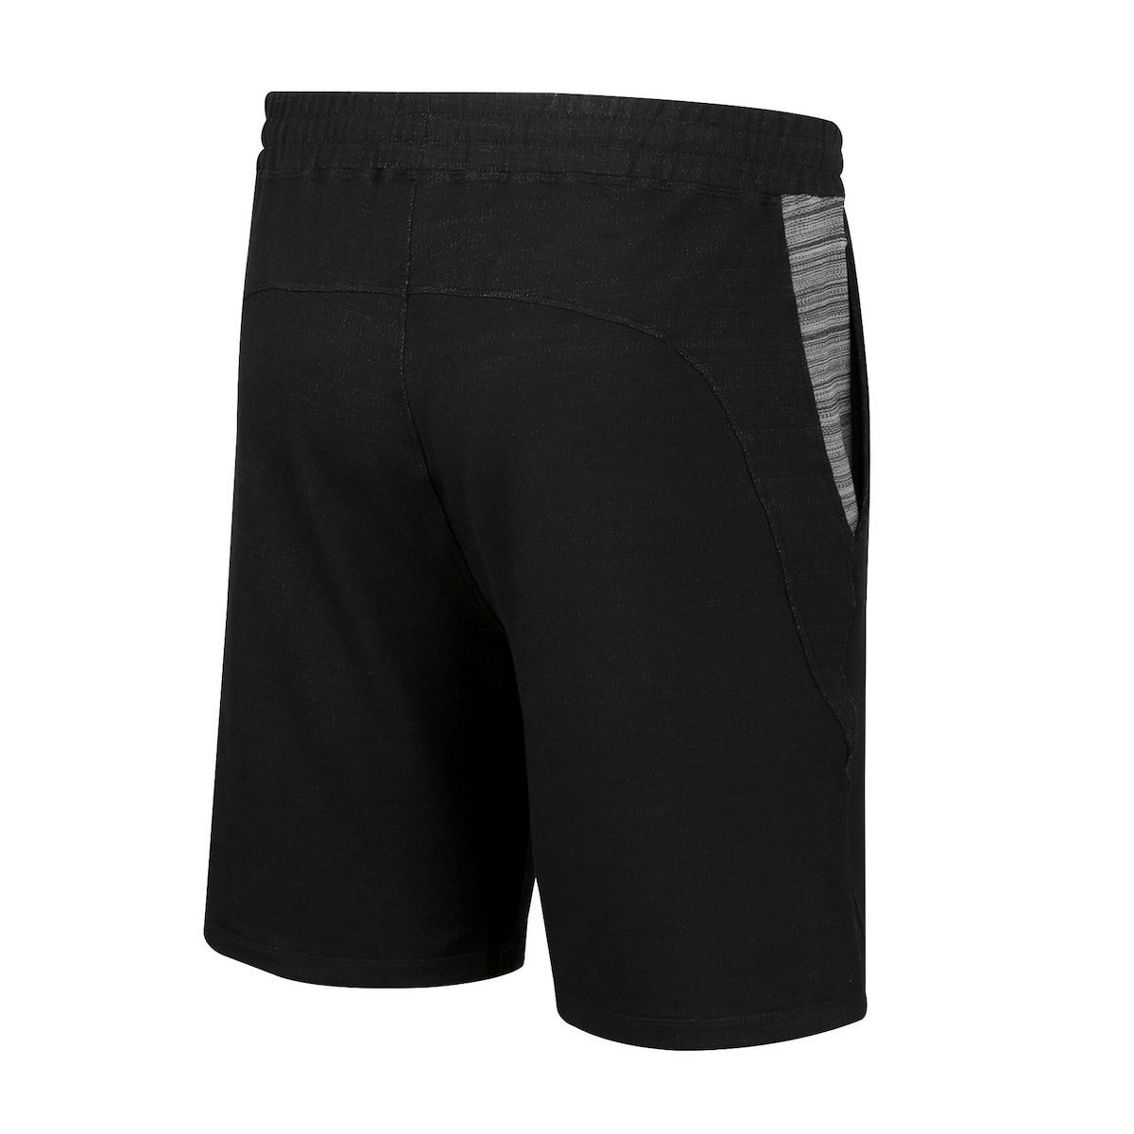 Colosseum Men's Black Army Black Knights Wild Party Shorts - Image 4 of 4